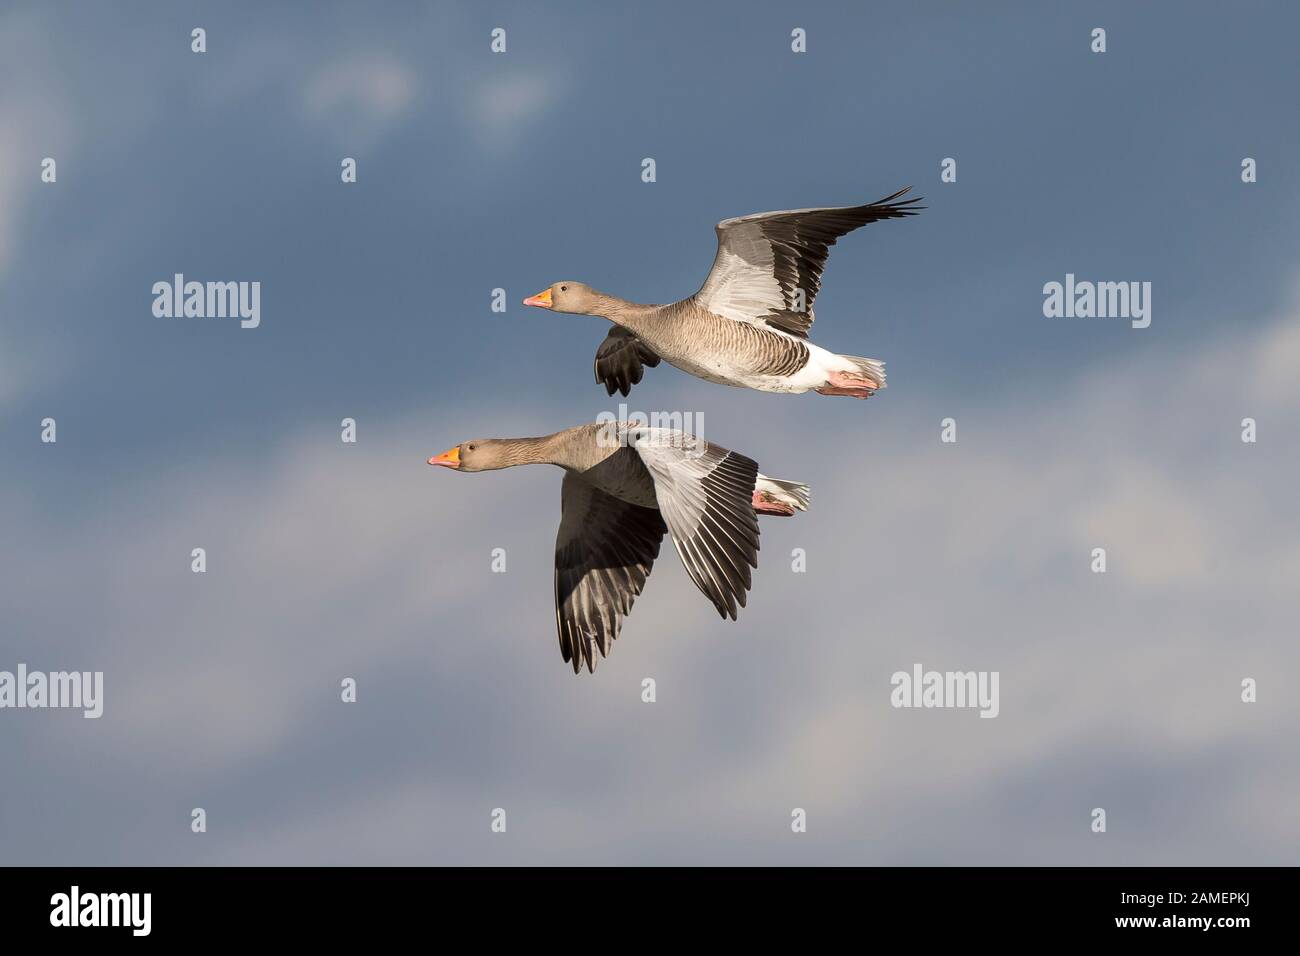 Low angle pair of wild UK greylag geese (Anser anser) isolated in midair flight. Geese flying free, high in the sky, in winter sunshine. Stock Photo